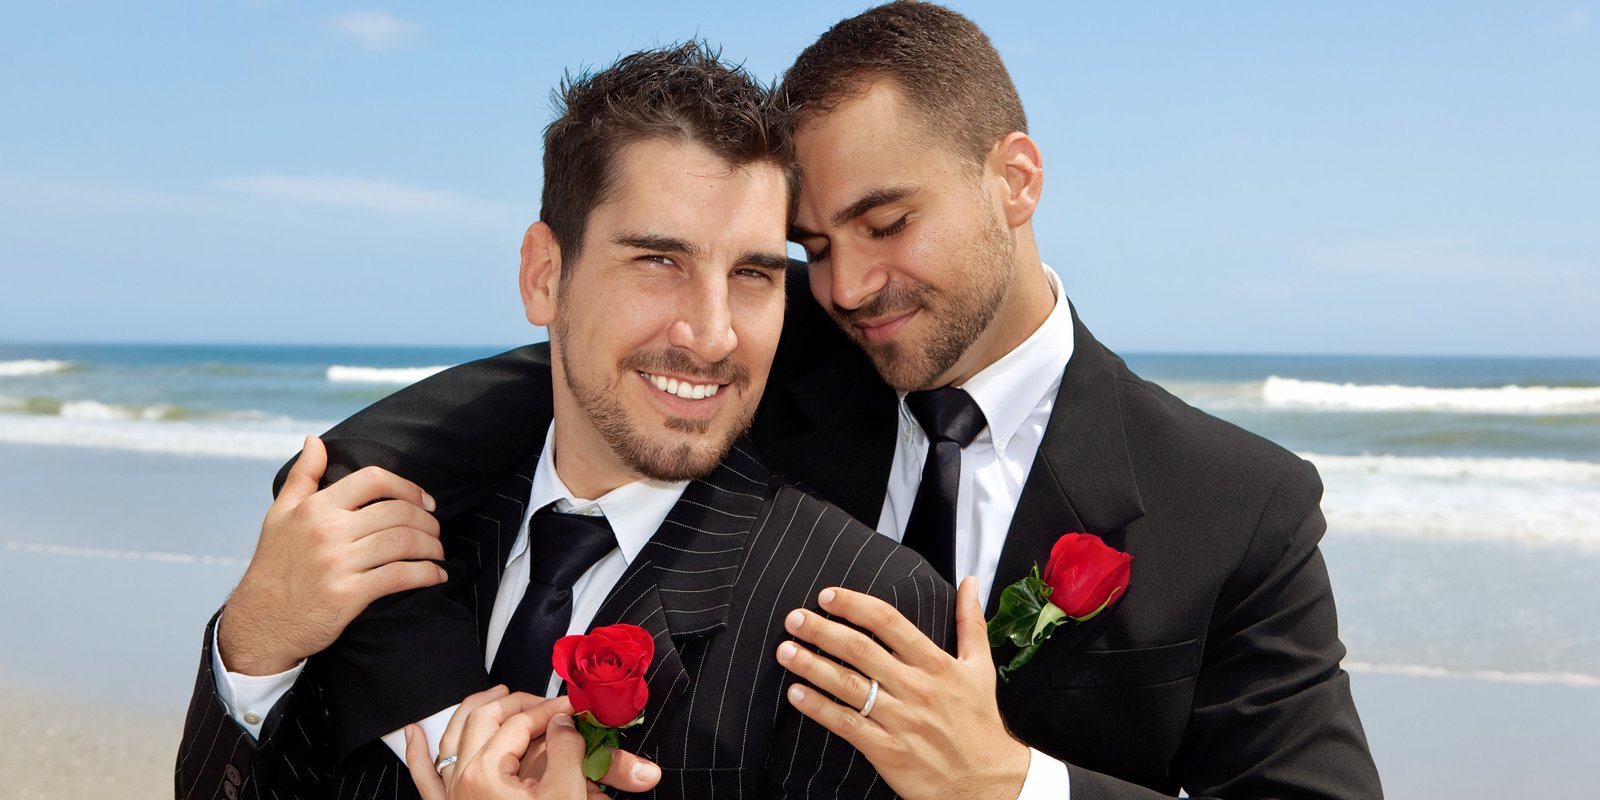 Nepal became the first country to authorize gay marriage.